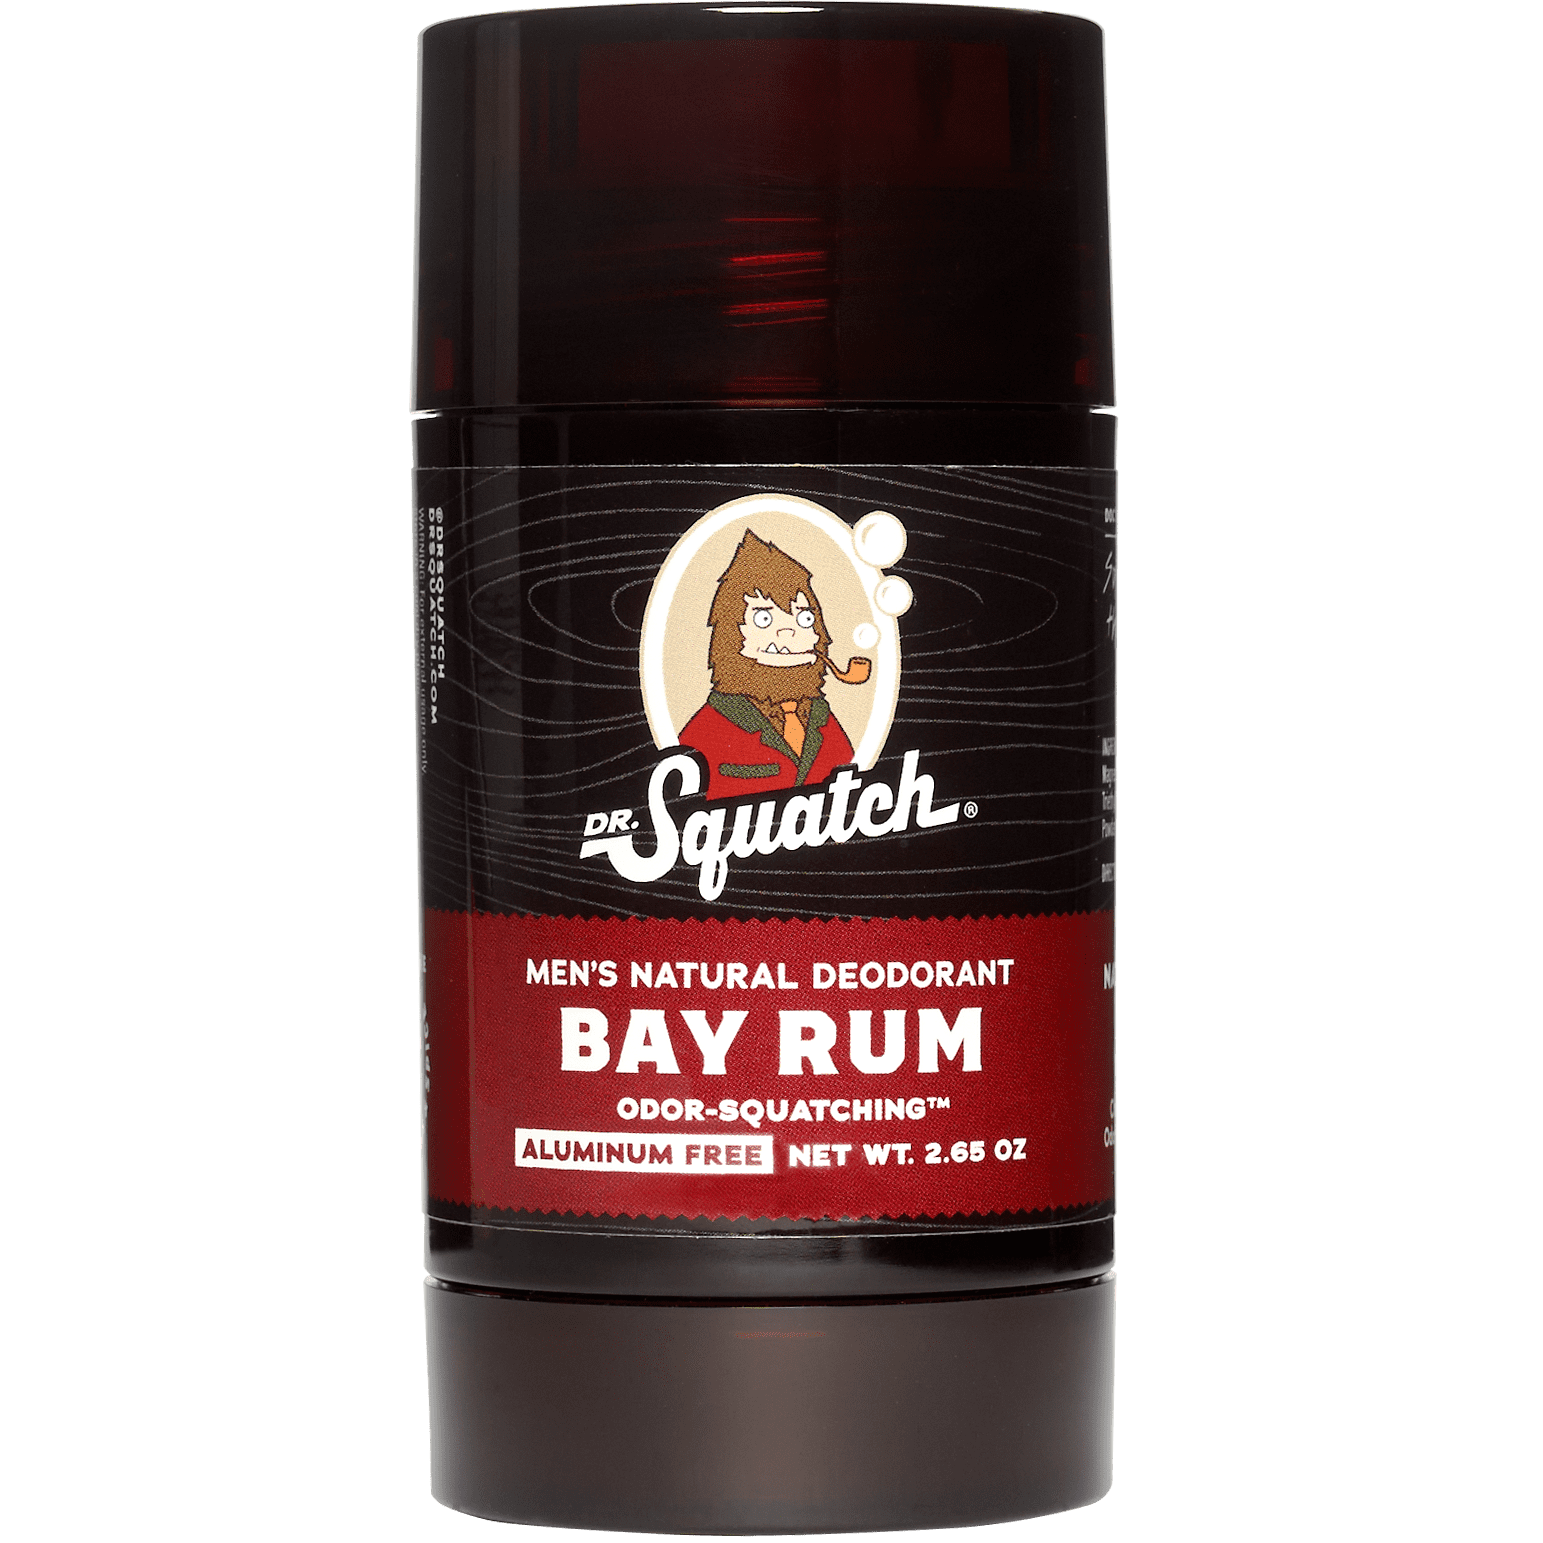 Does anyone else think the Bay Rum deodorant smells like pink bubblegum? :  r/DrSquatch